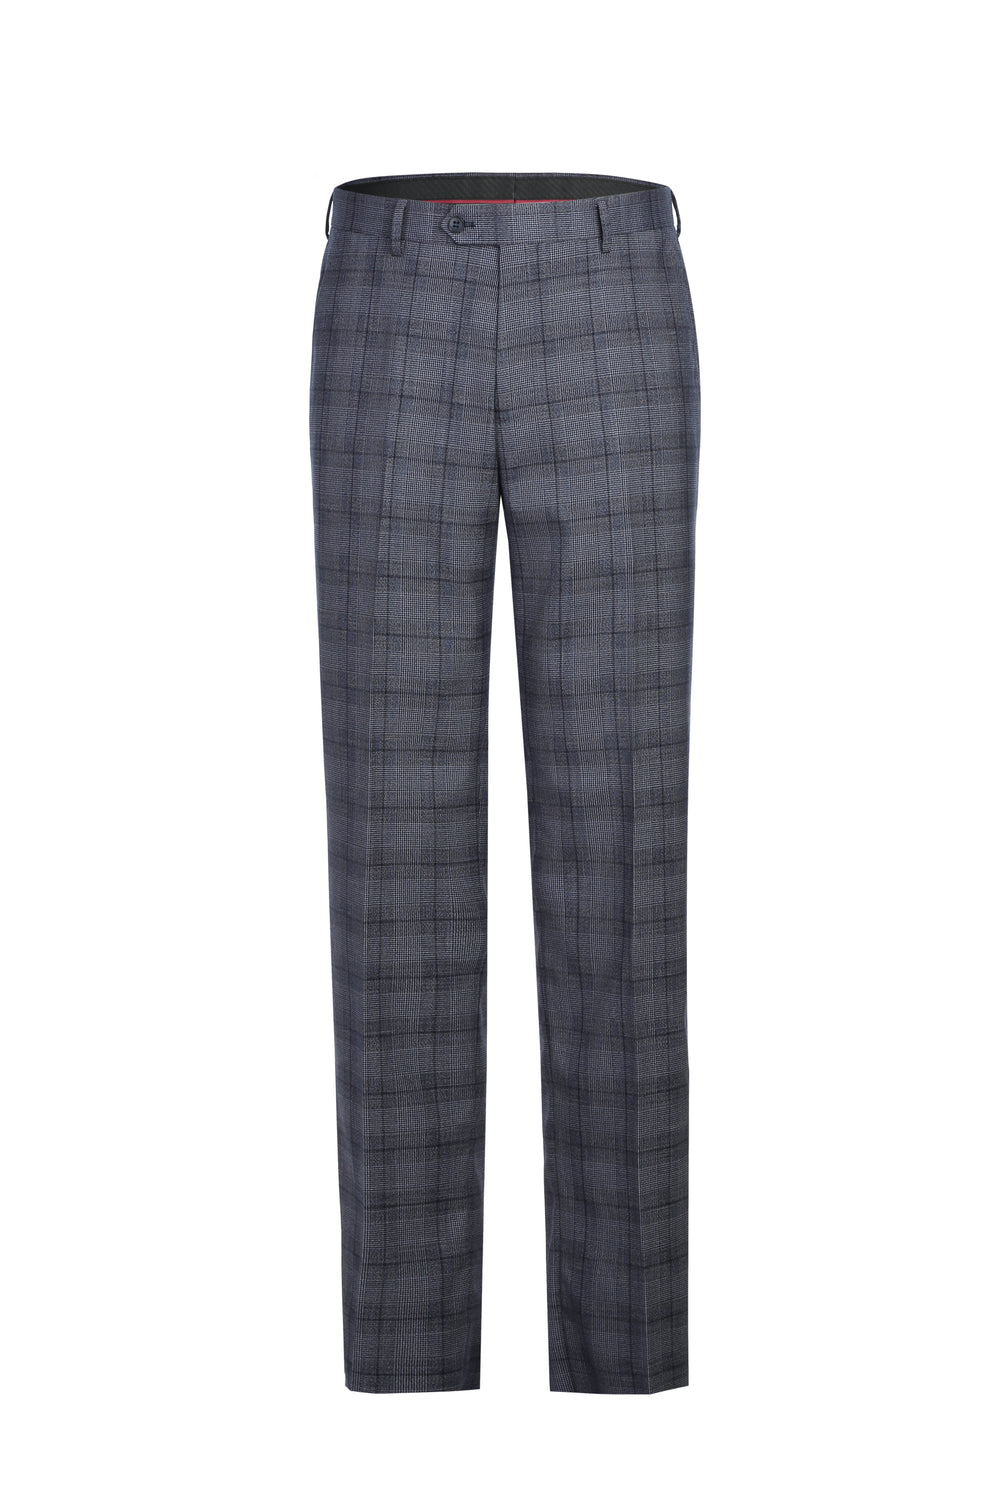 293-30 Men's Classic Fit Checked Suits